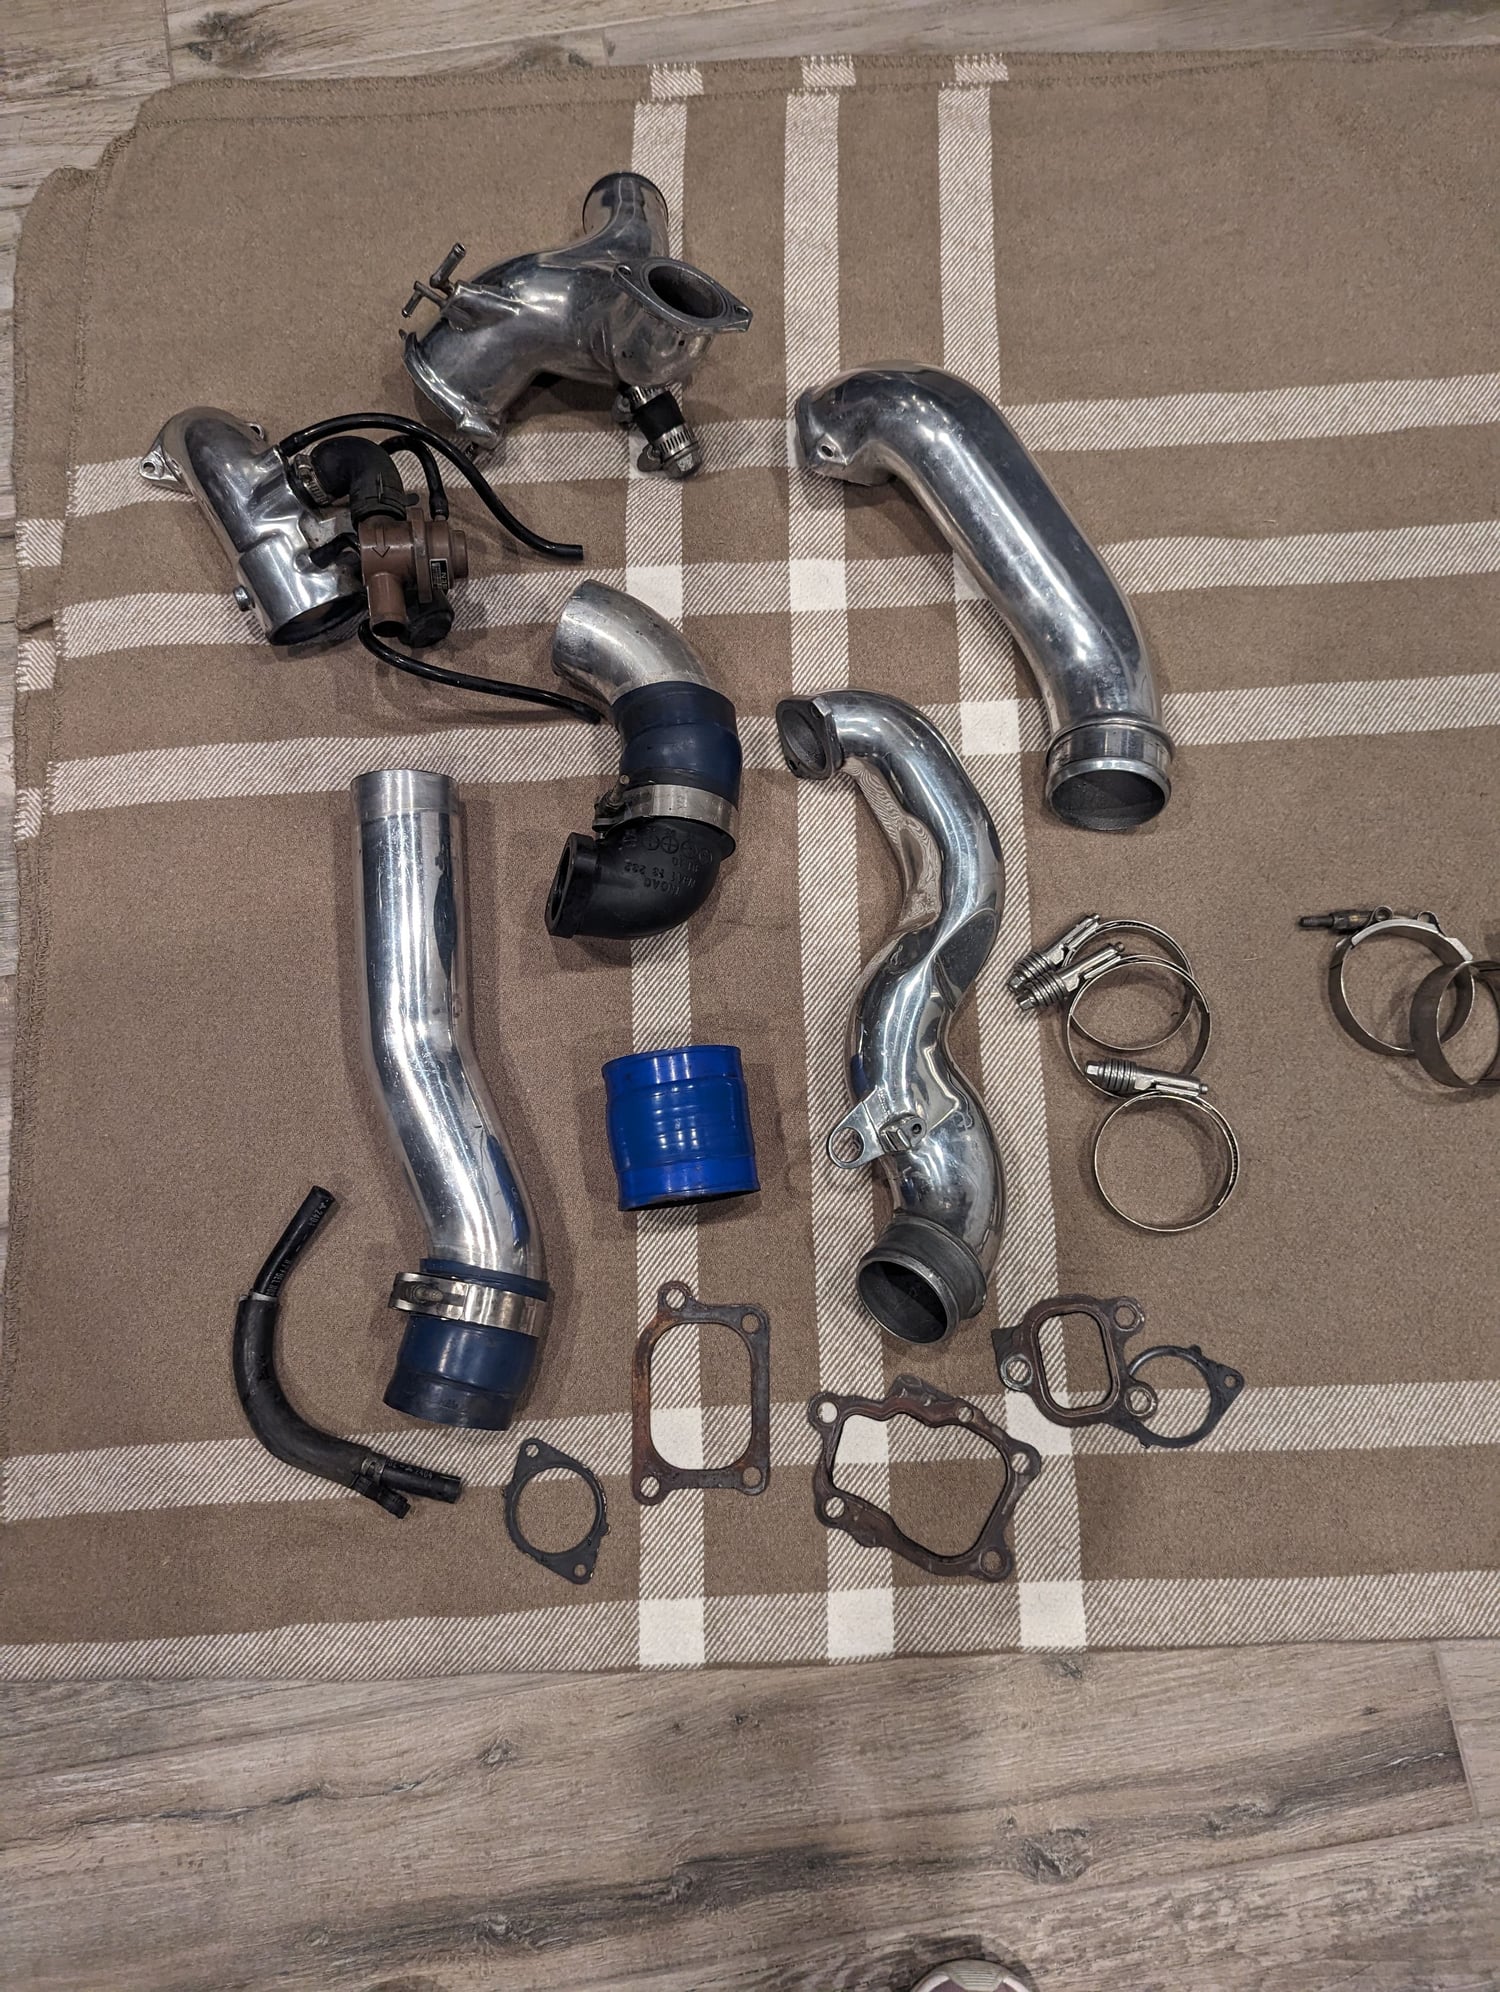 Engine - Intake/Fuel - Polished turbo intake piping for stock twins - Used - Manor, TX 78653, United States